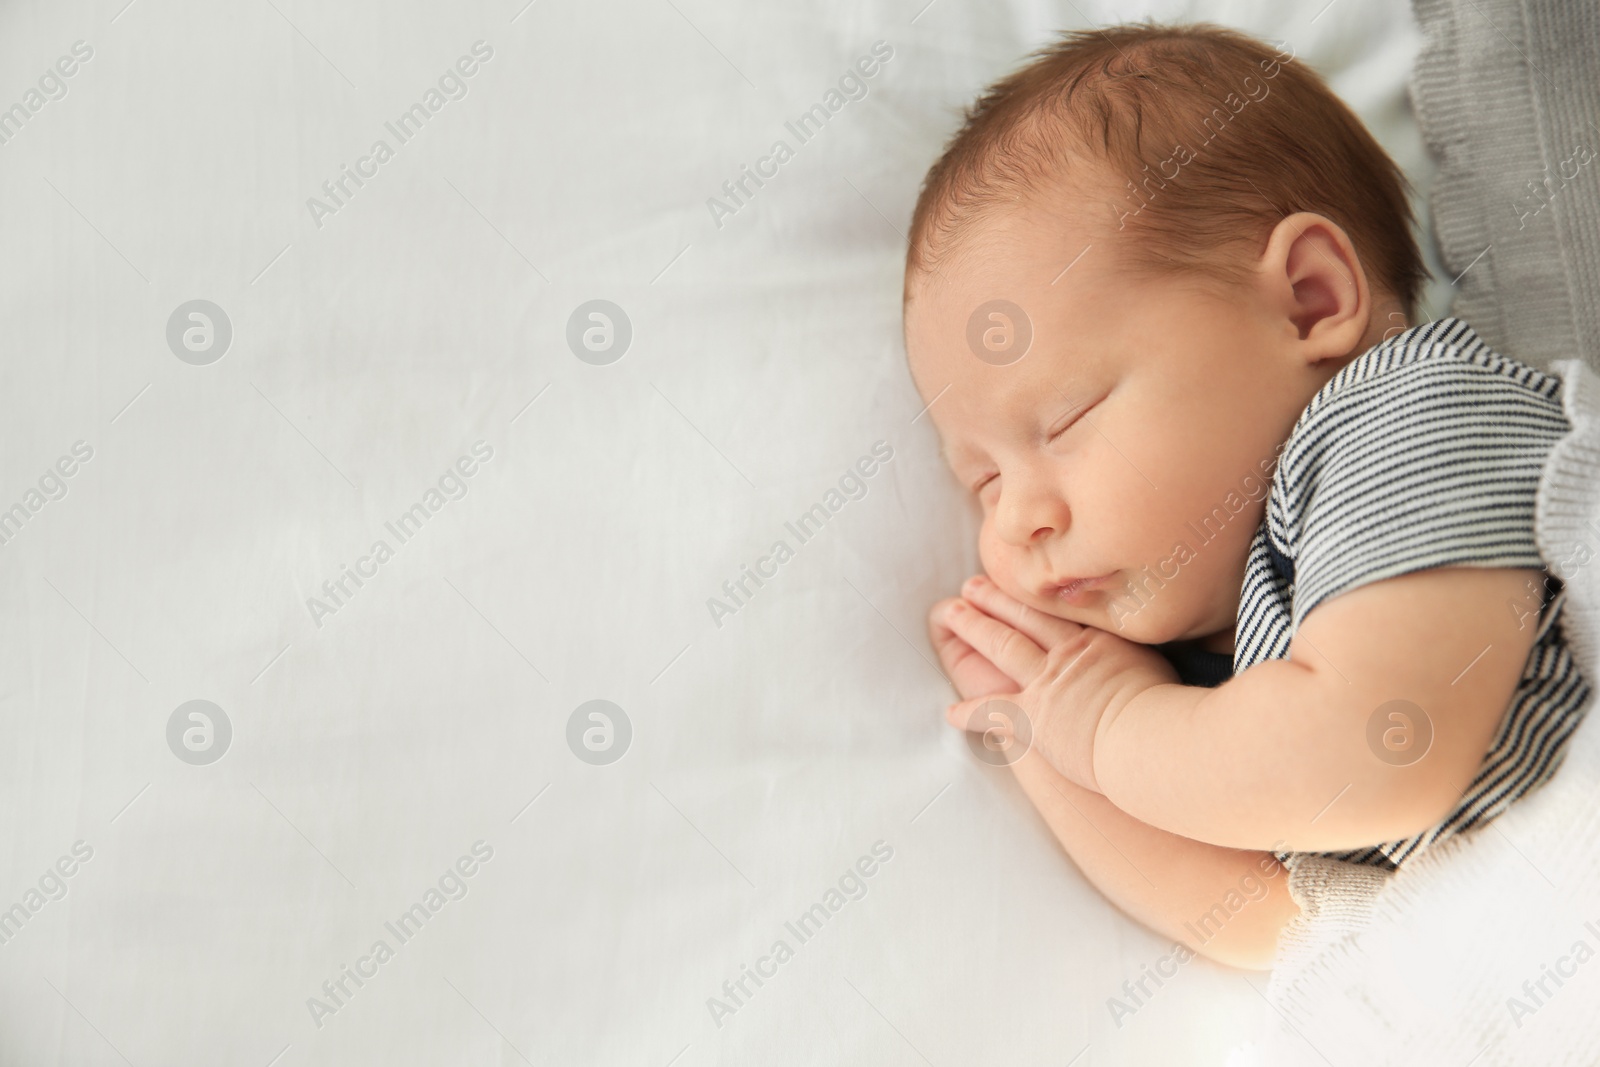 Photo of Adorable newborn baby peacefully sleeping on bed, top view with space for text